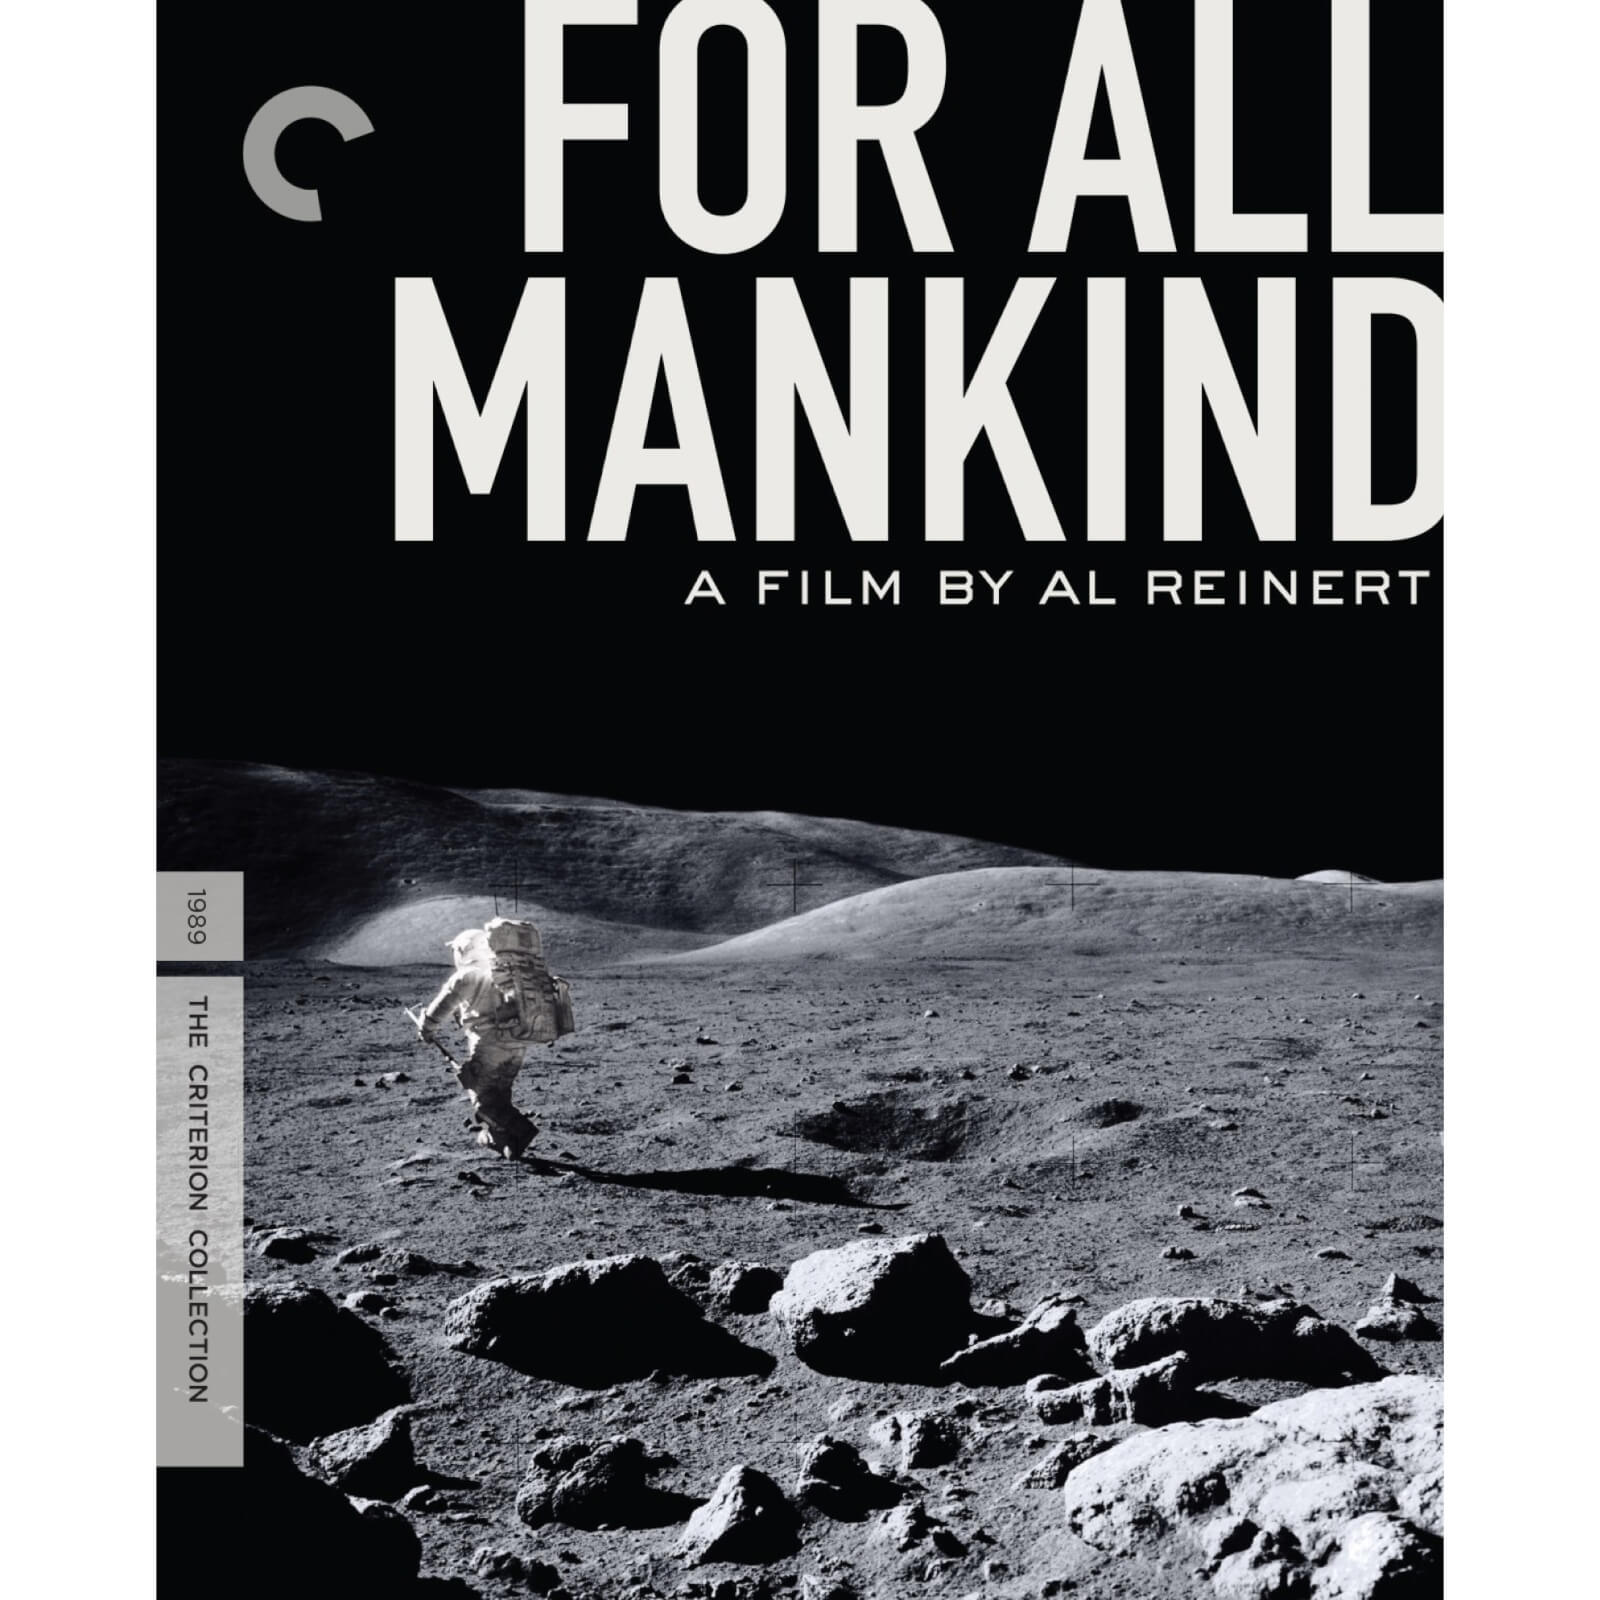 For All Mankind - The Criterion Collection 4K Ultra HD (Includes Blu-ray) (US Import)